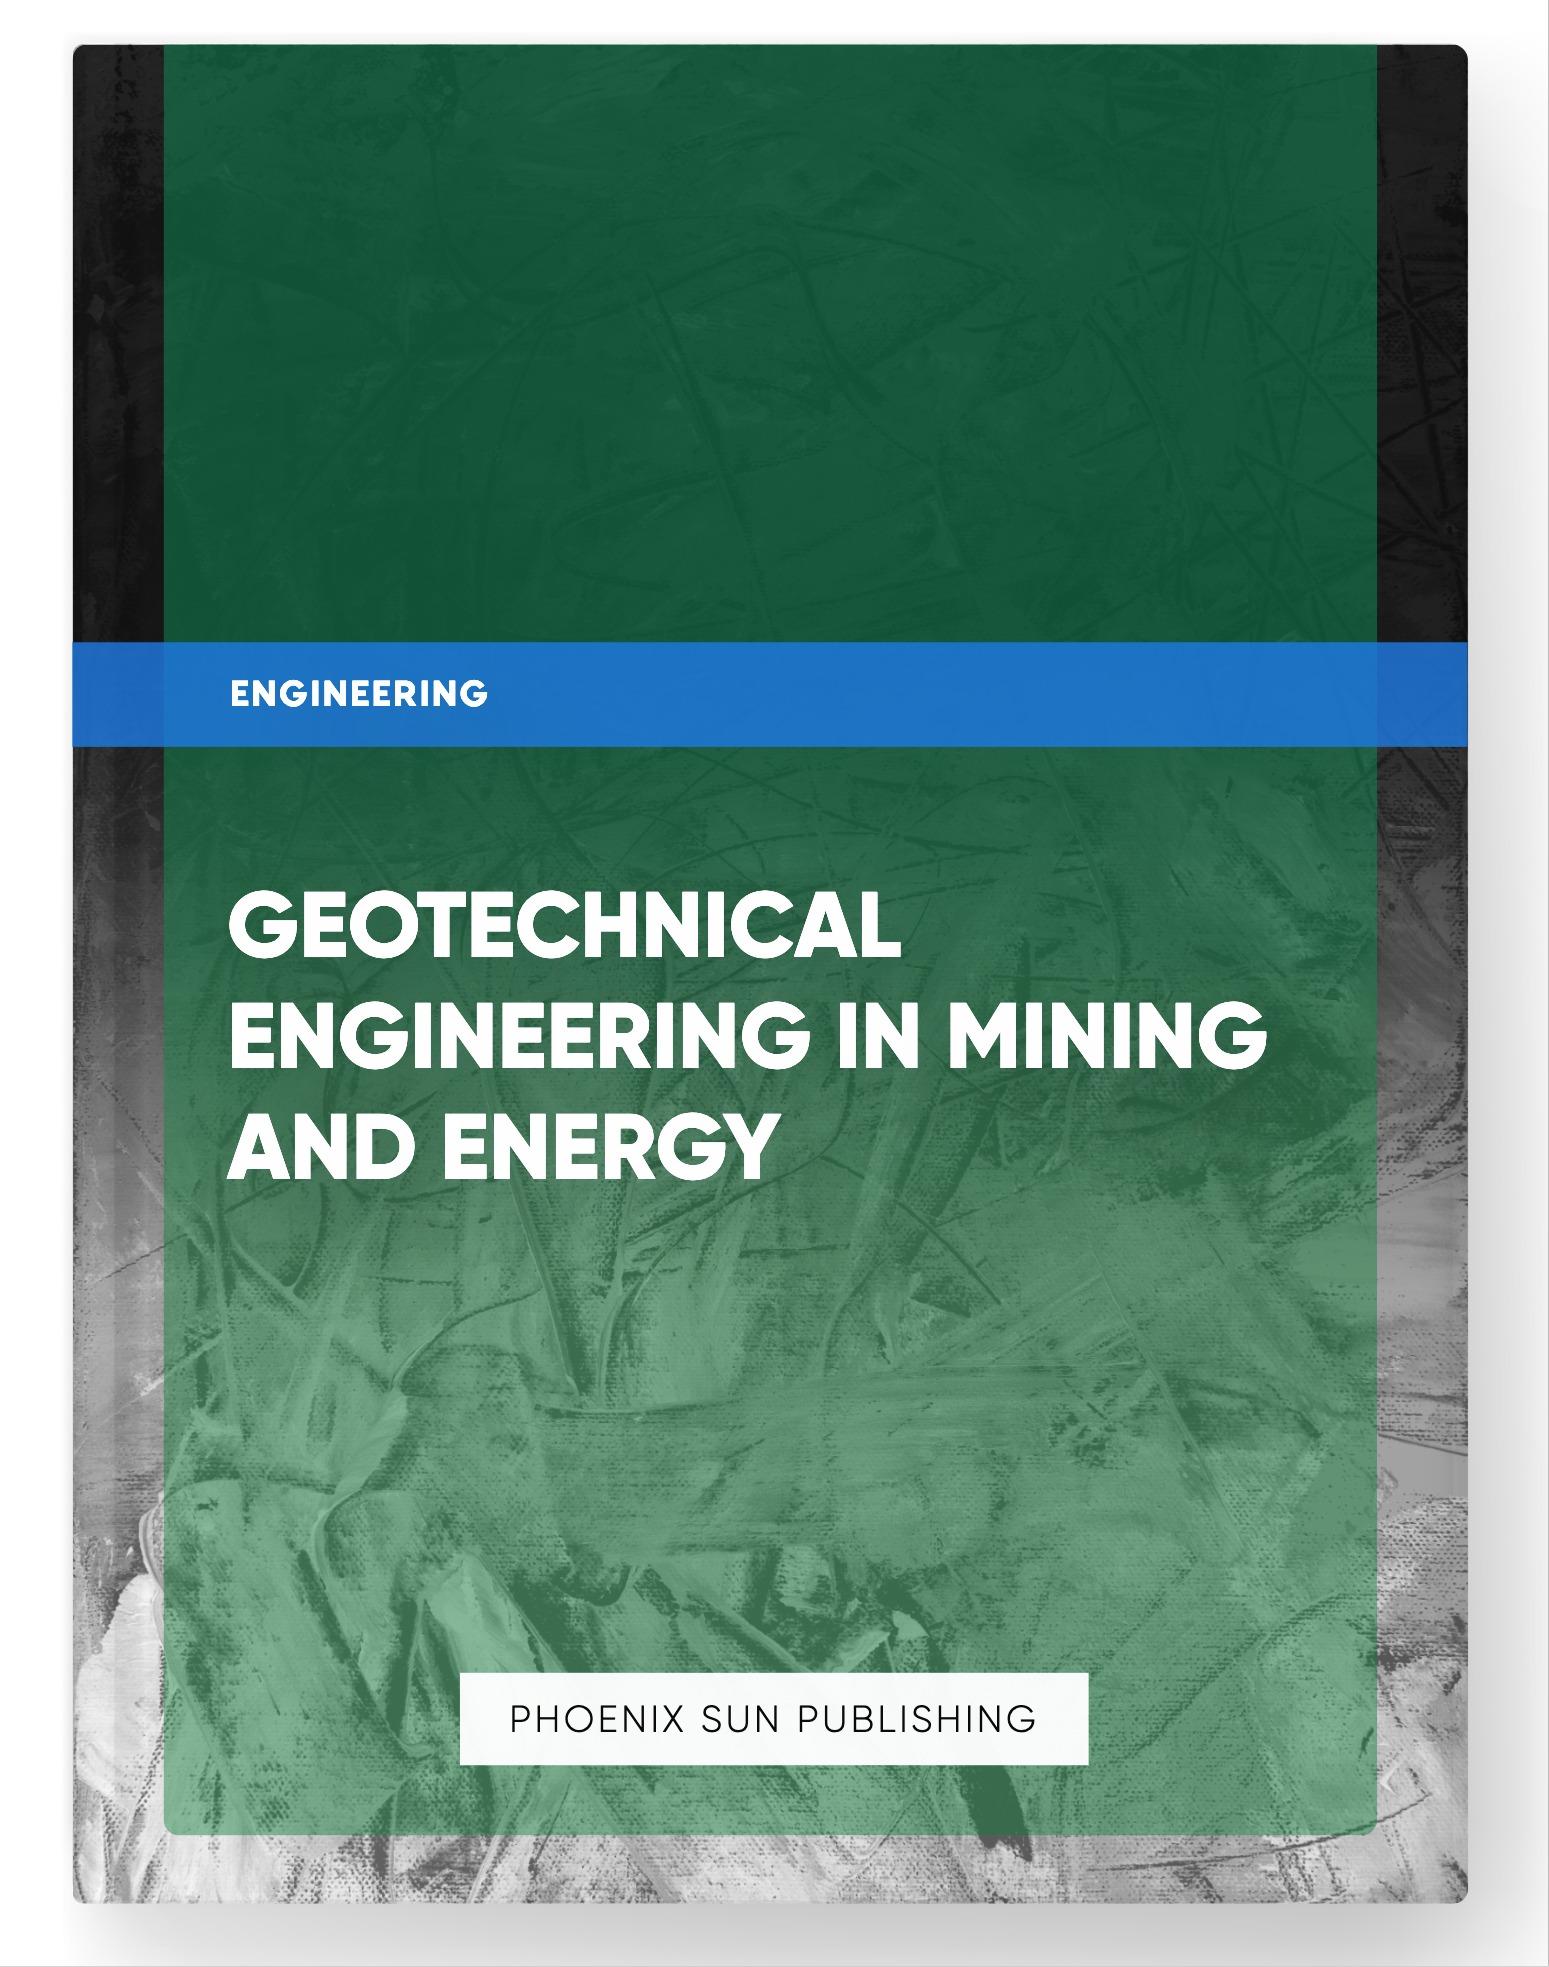 Geotechnical Engineering in Mining and Energy